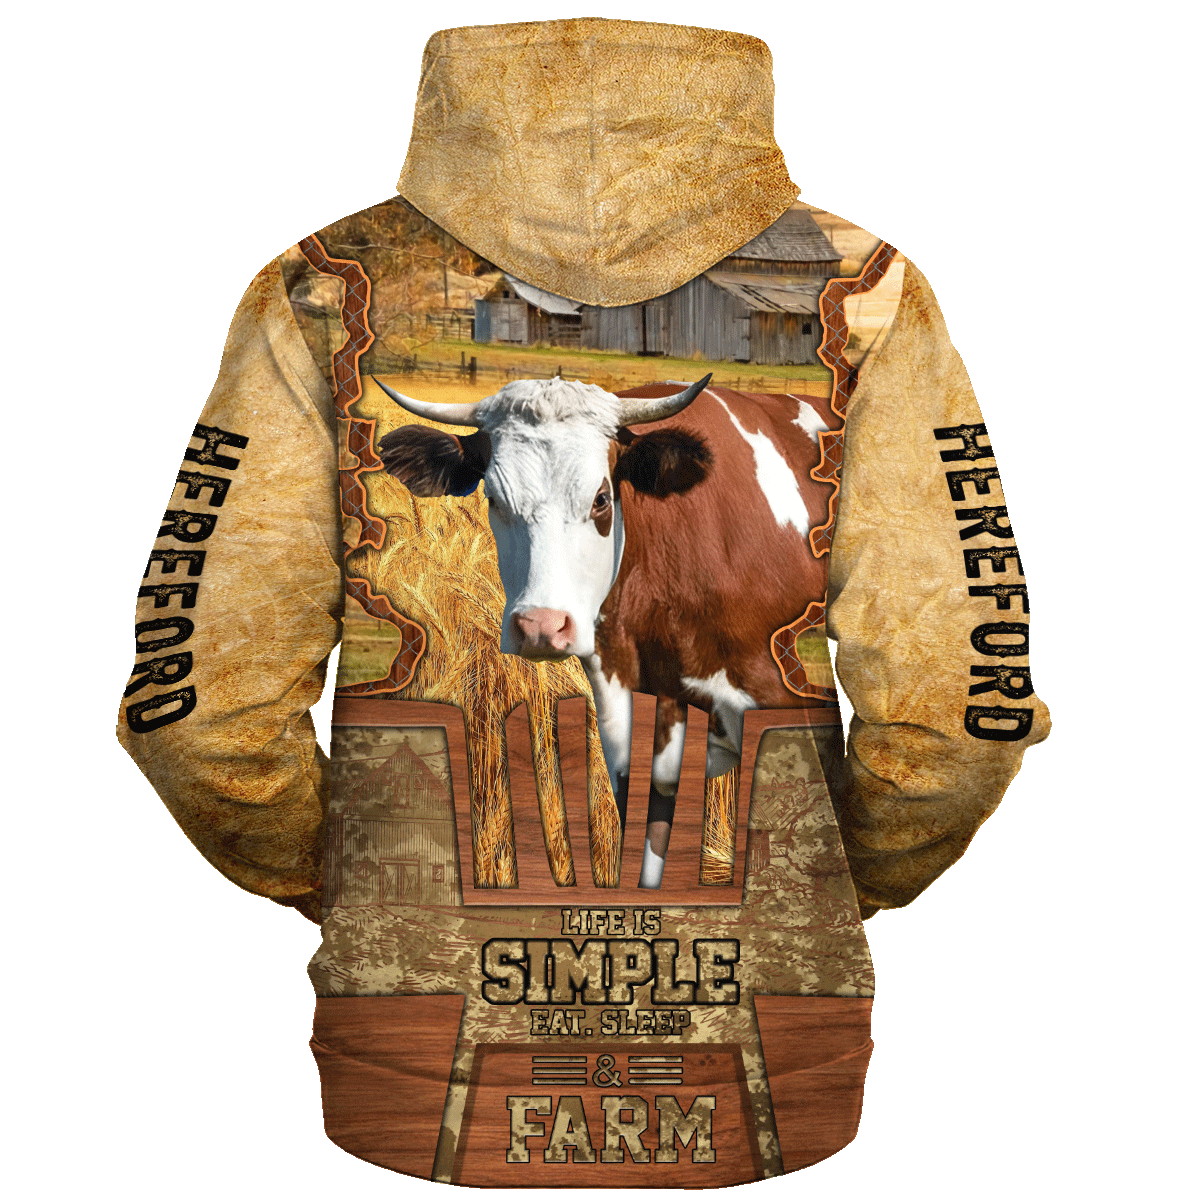 Hereford Life Is Simple A Farm Hoodie